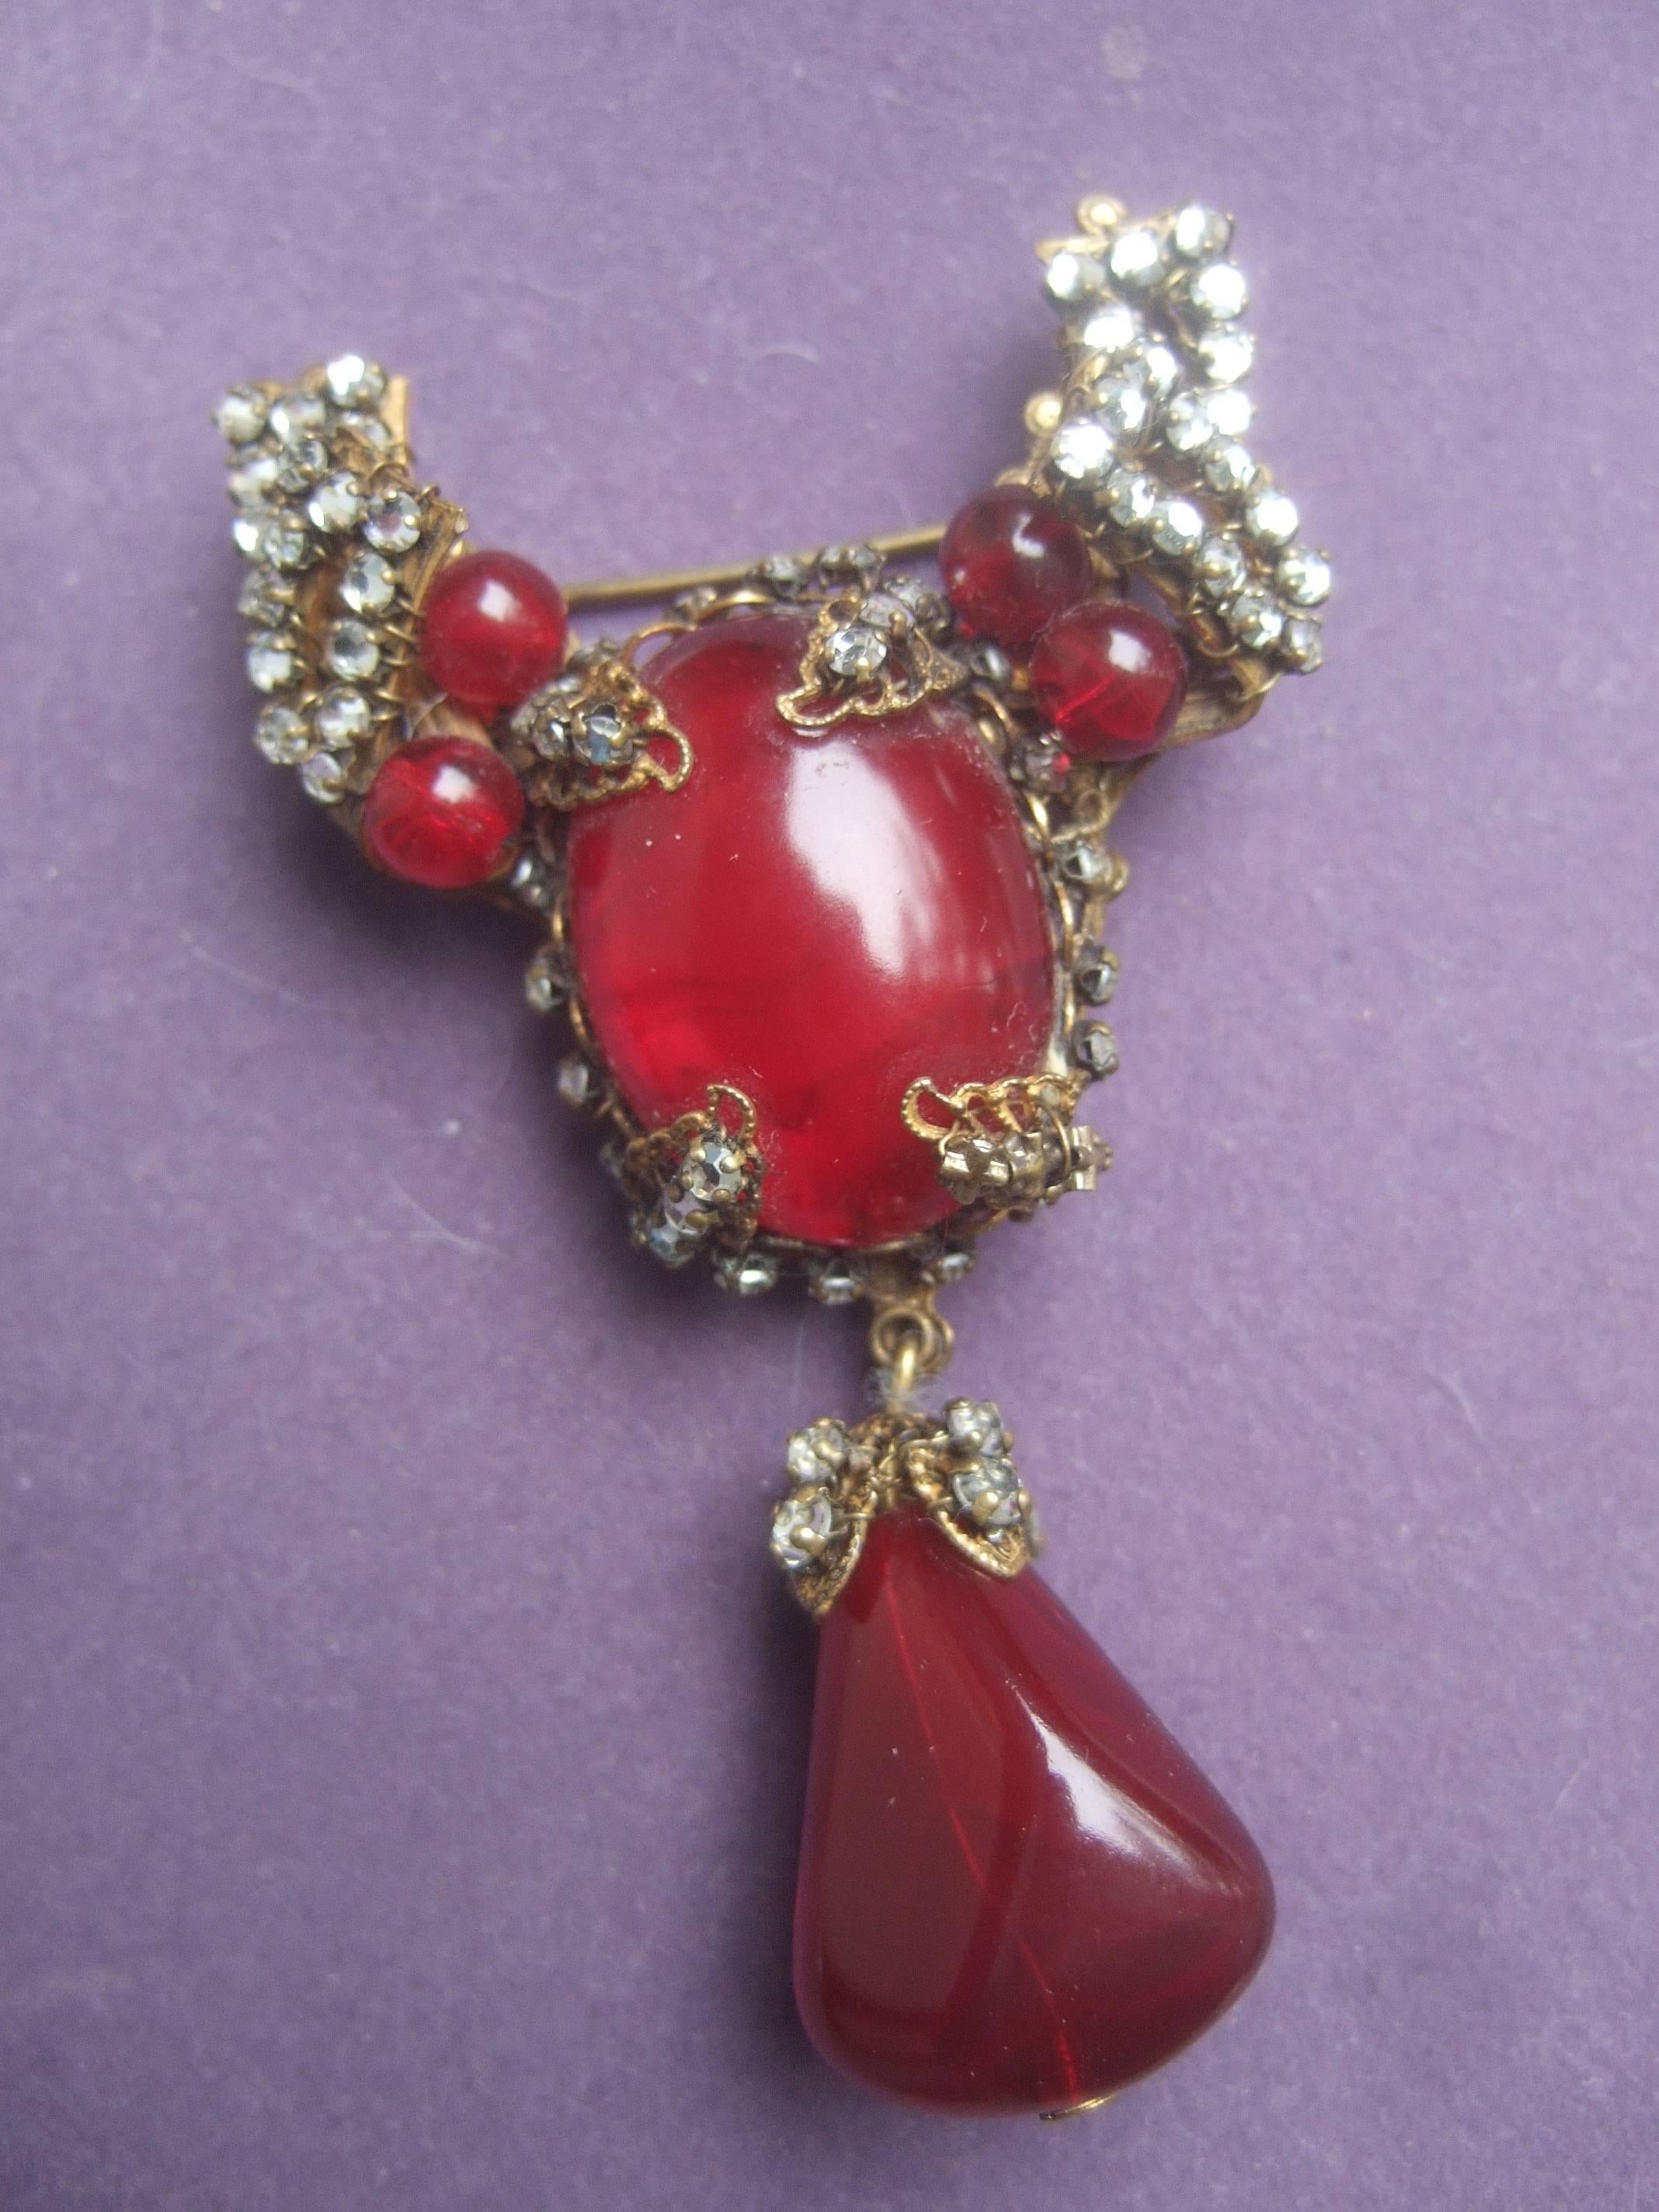 Miriam Haskell Exquisite scarlet glass tear drop brooch ca 1950s
The designer costume brooch is adorned with a large
oval glass deep red cabochon in the center

Dangling from the ornate brooch is a matching red glass
cabochon. The intricate filigree